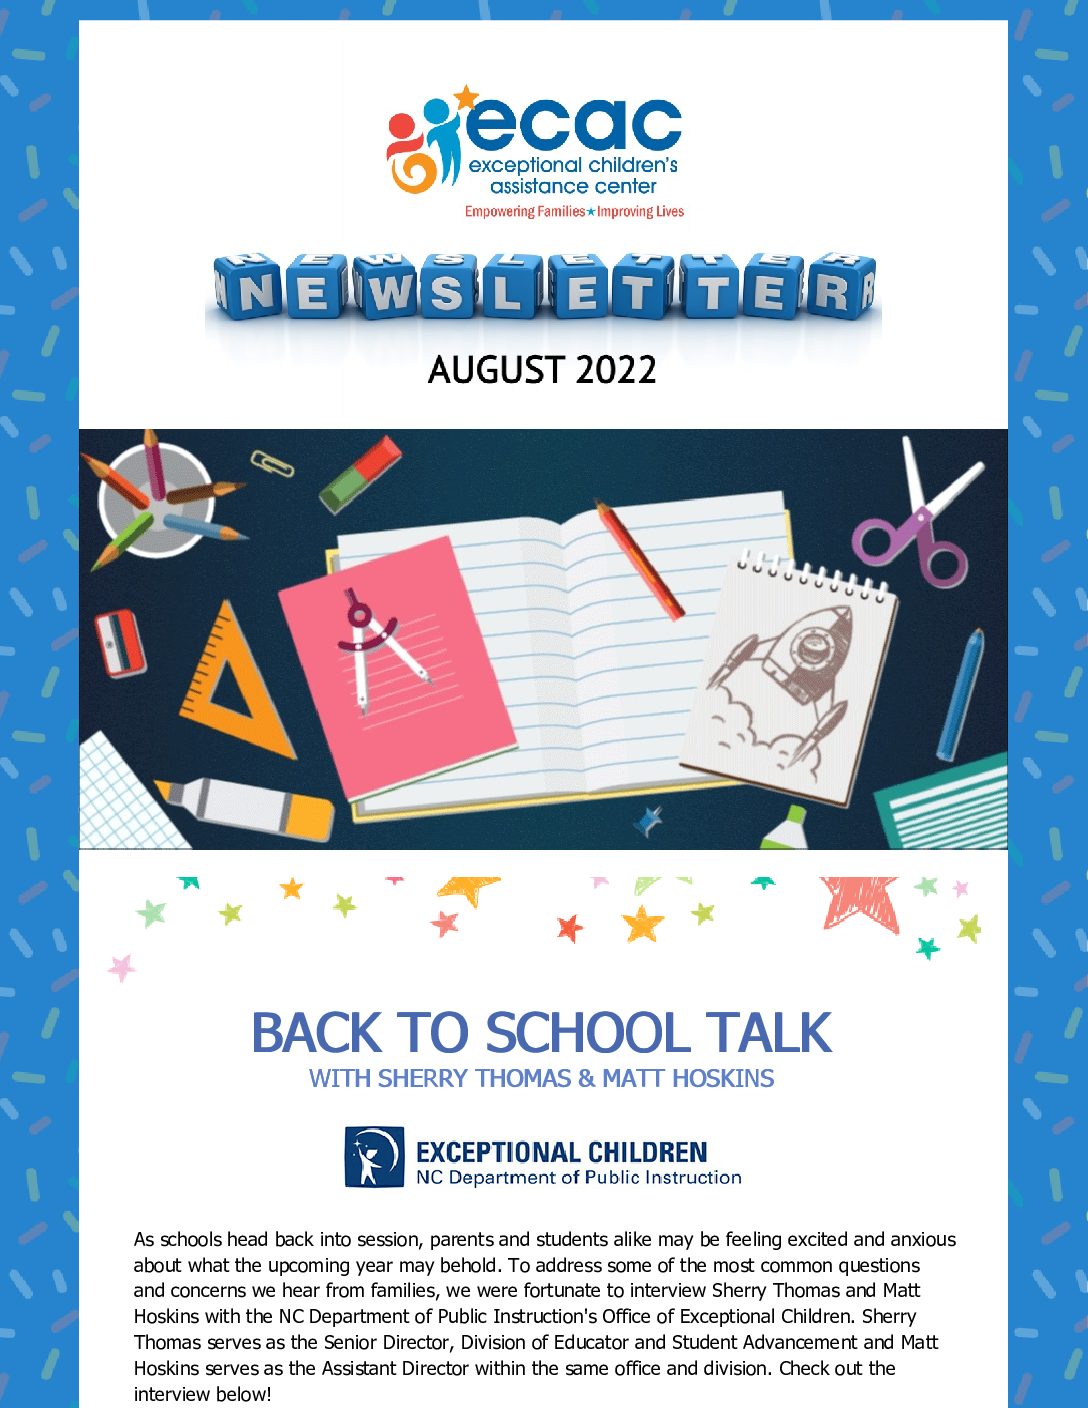 Check out ECAC’s Back to School Newsletter!